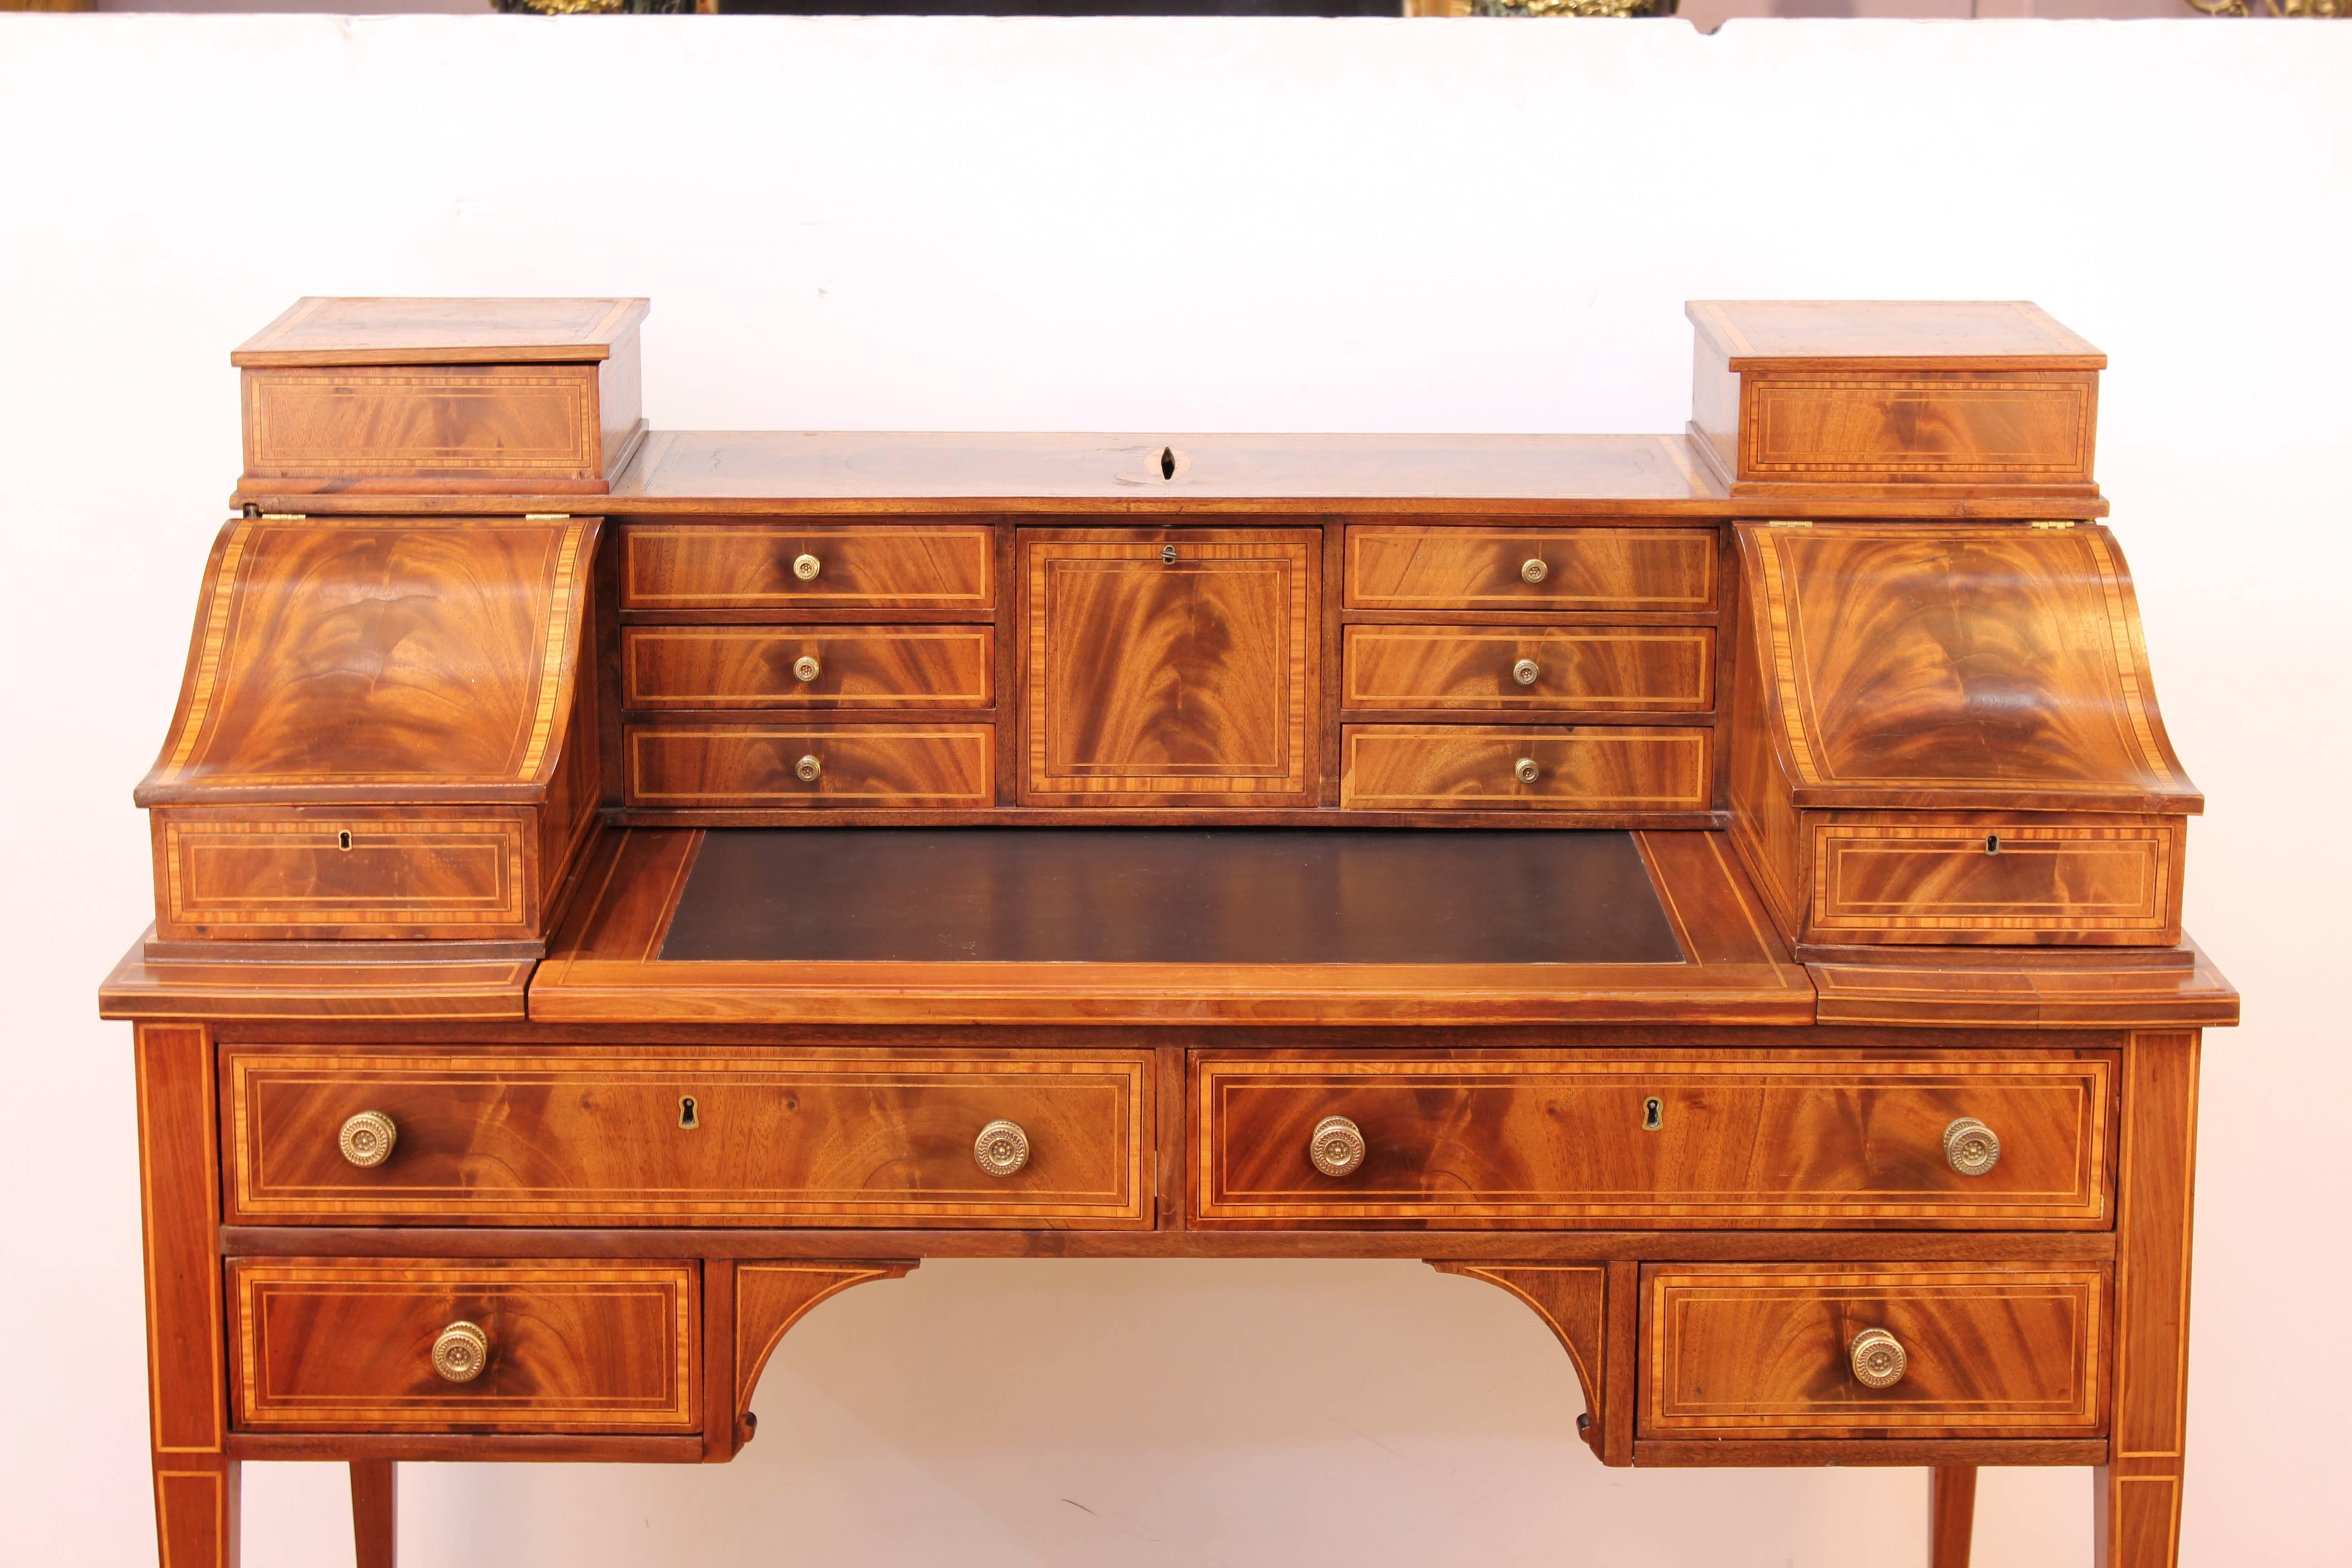 Carlton House desk dating from the 19th Century. Stands on four narrow carved legs and accented in delicate wood work. Features multiple drawers, compartments and a top extension. Wear appropriate to age and use. The piece is in good condition. 